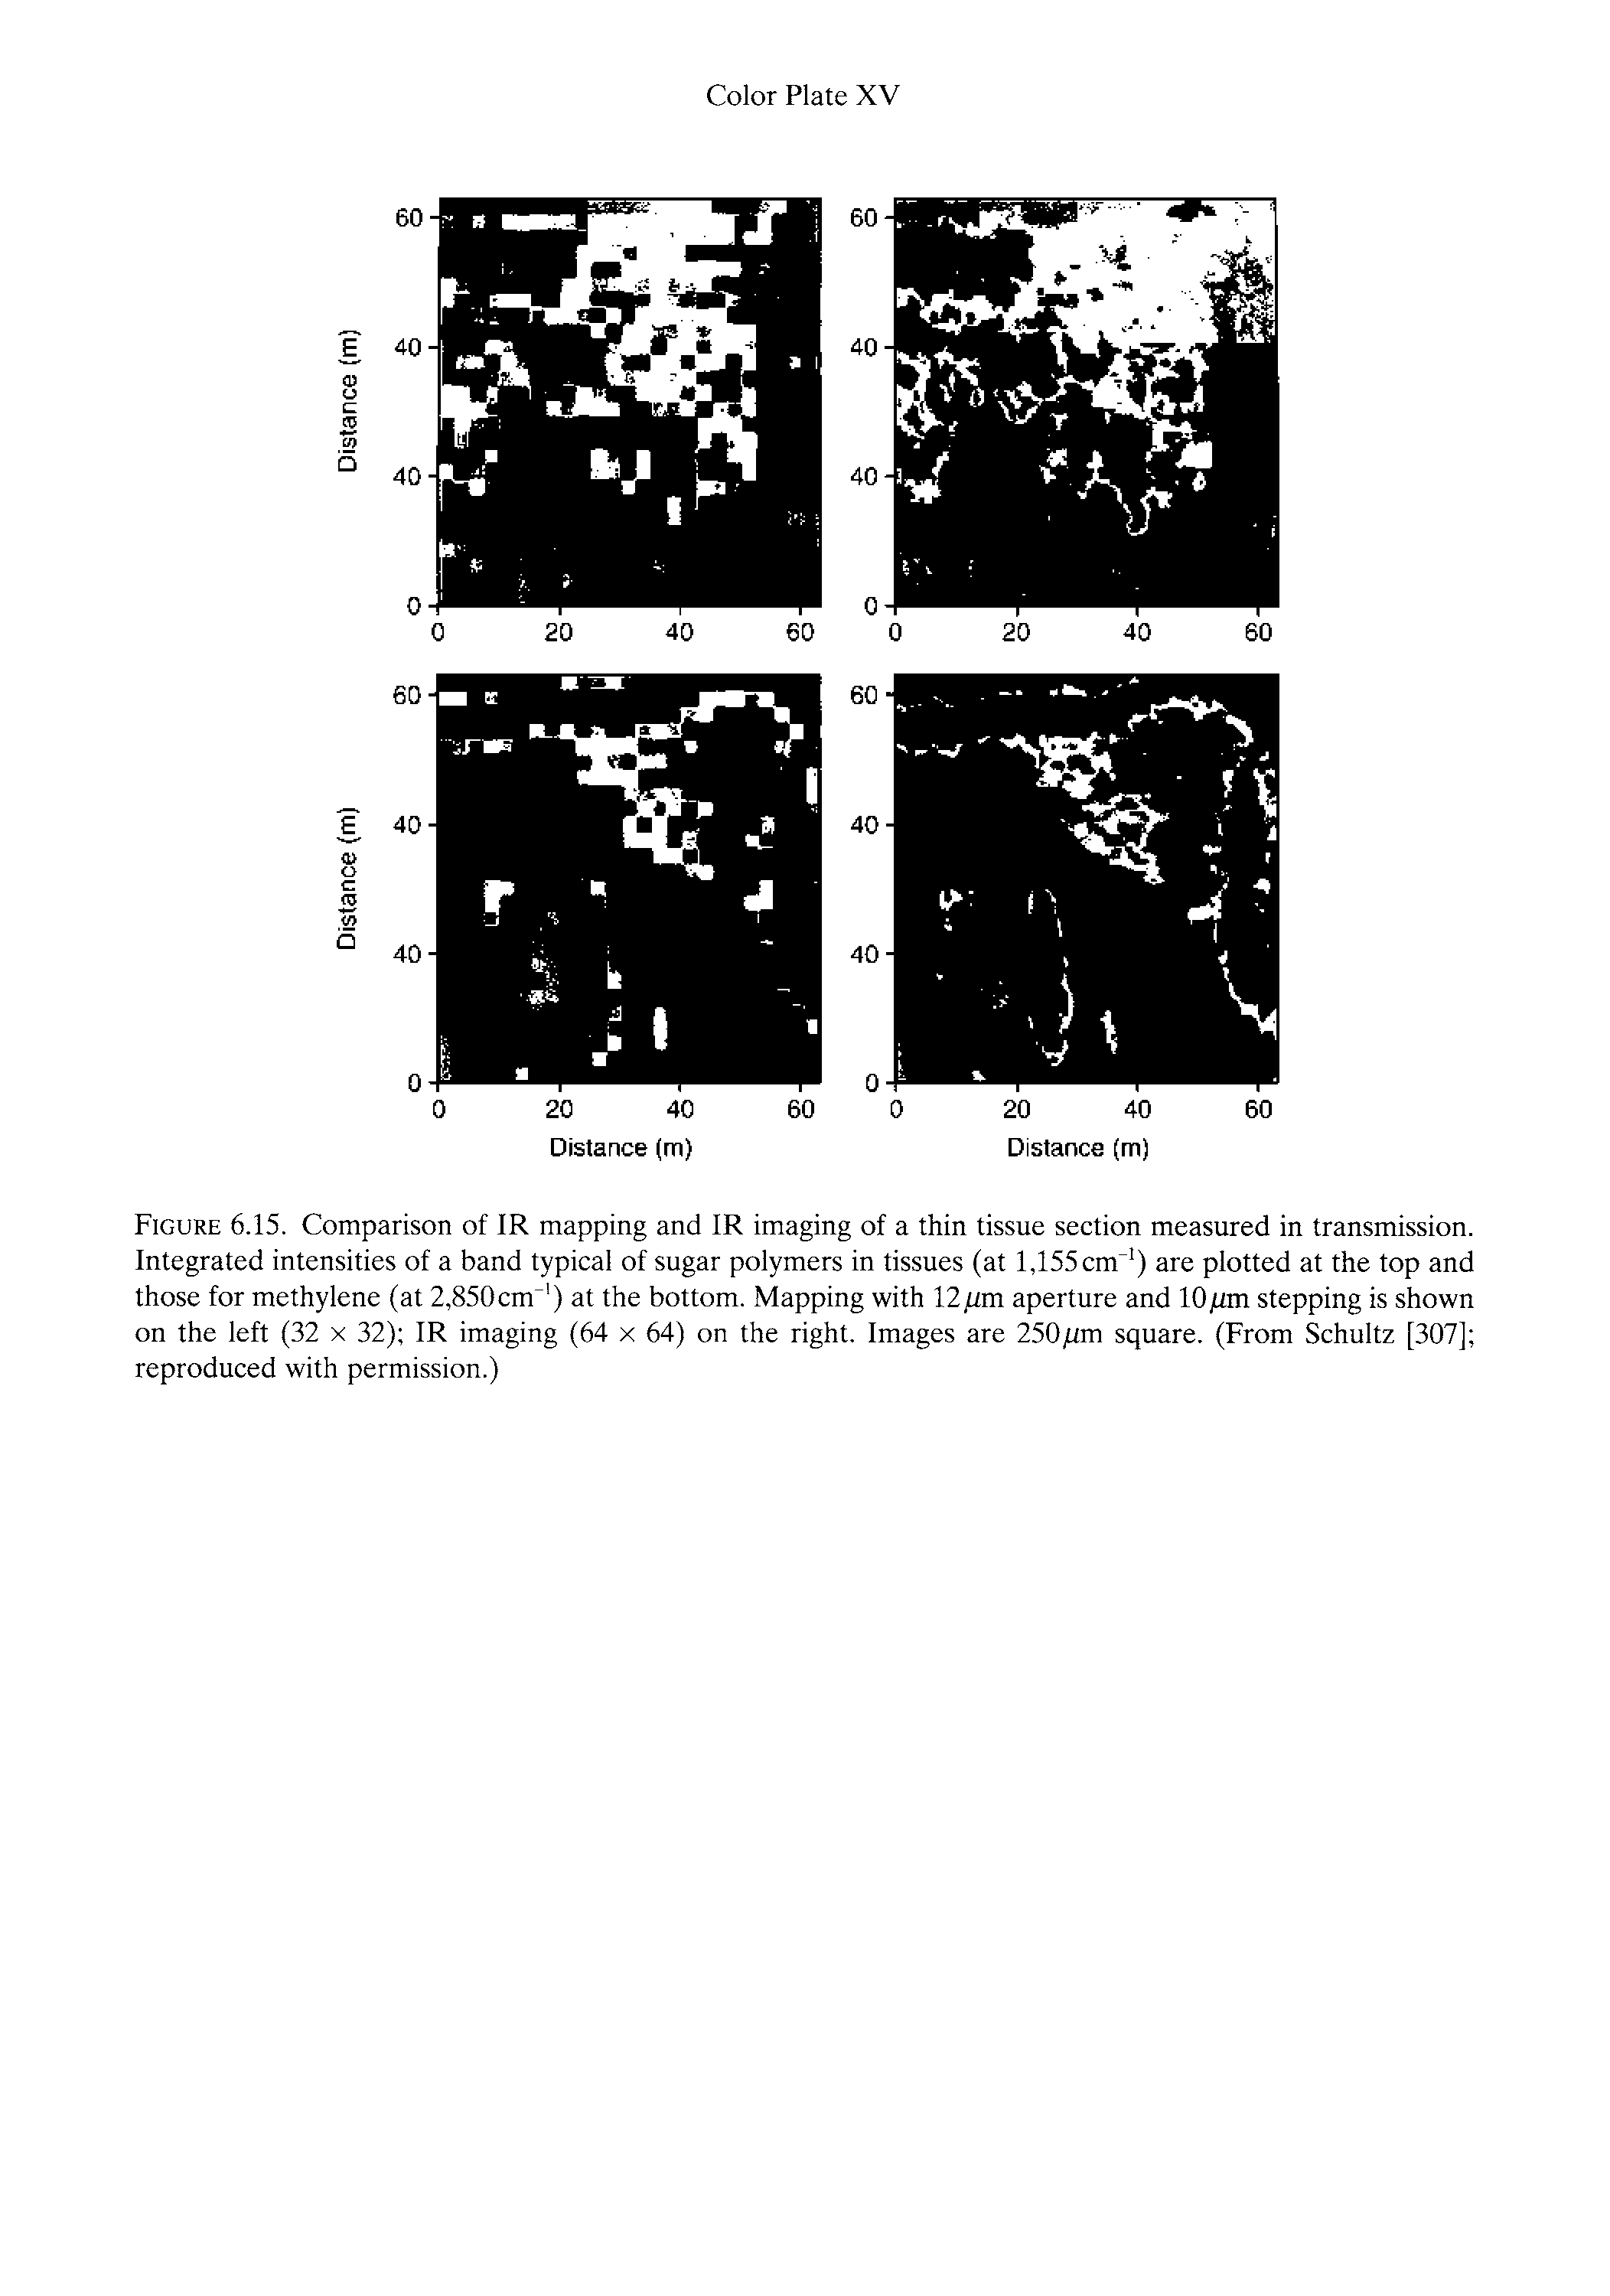 Figure 6.15. Comparison of IR mapping and IR imaging of a thin tissue section measured in transmission. Integrated intensities of a band typical of sugar polymers in tissues (at 1,155 cm ) are plotted at the top and those for methylene (at 2,850cm ) at the bottom. Mapping with 12 ttm aperture and lO/tm stepping is shown on the left (32 x 32) IR imaging (64 x 64) on the right. Images are 250/im square. (From Schultz [307] reproduced with permission.)...